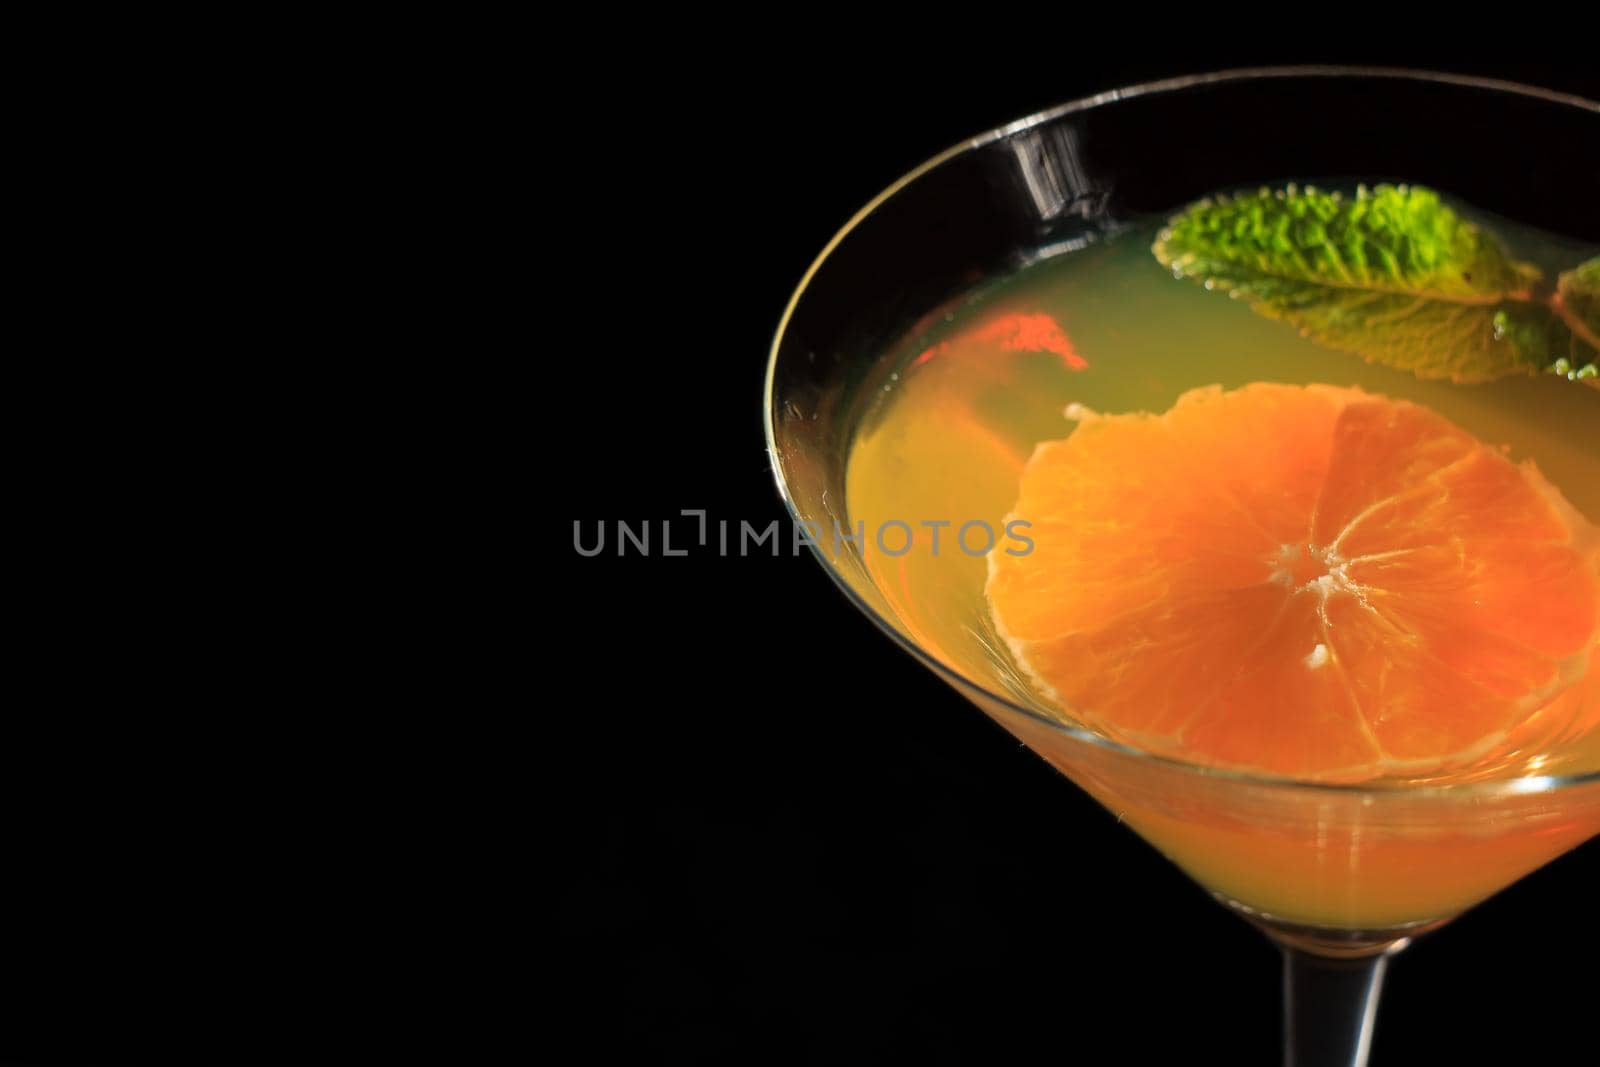 Kiwi jelly with lime pieces in the glass topped mint leaves in the black background